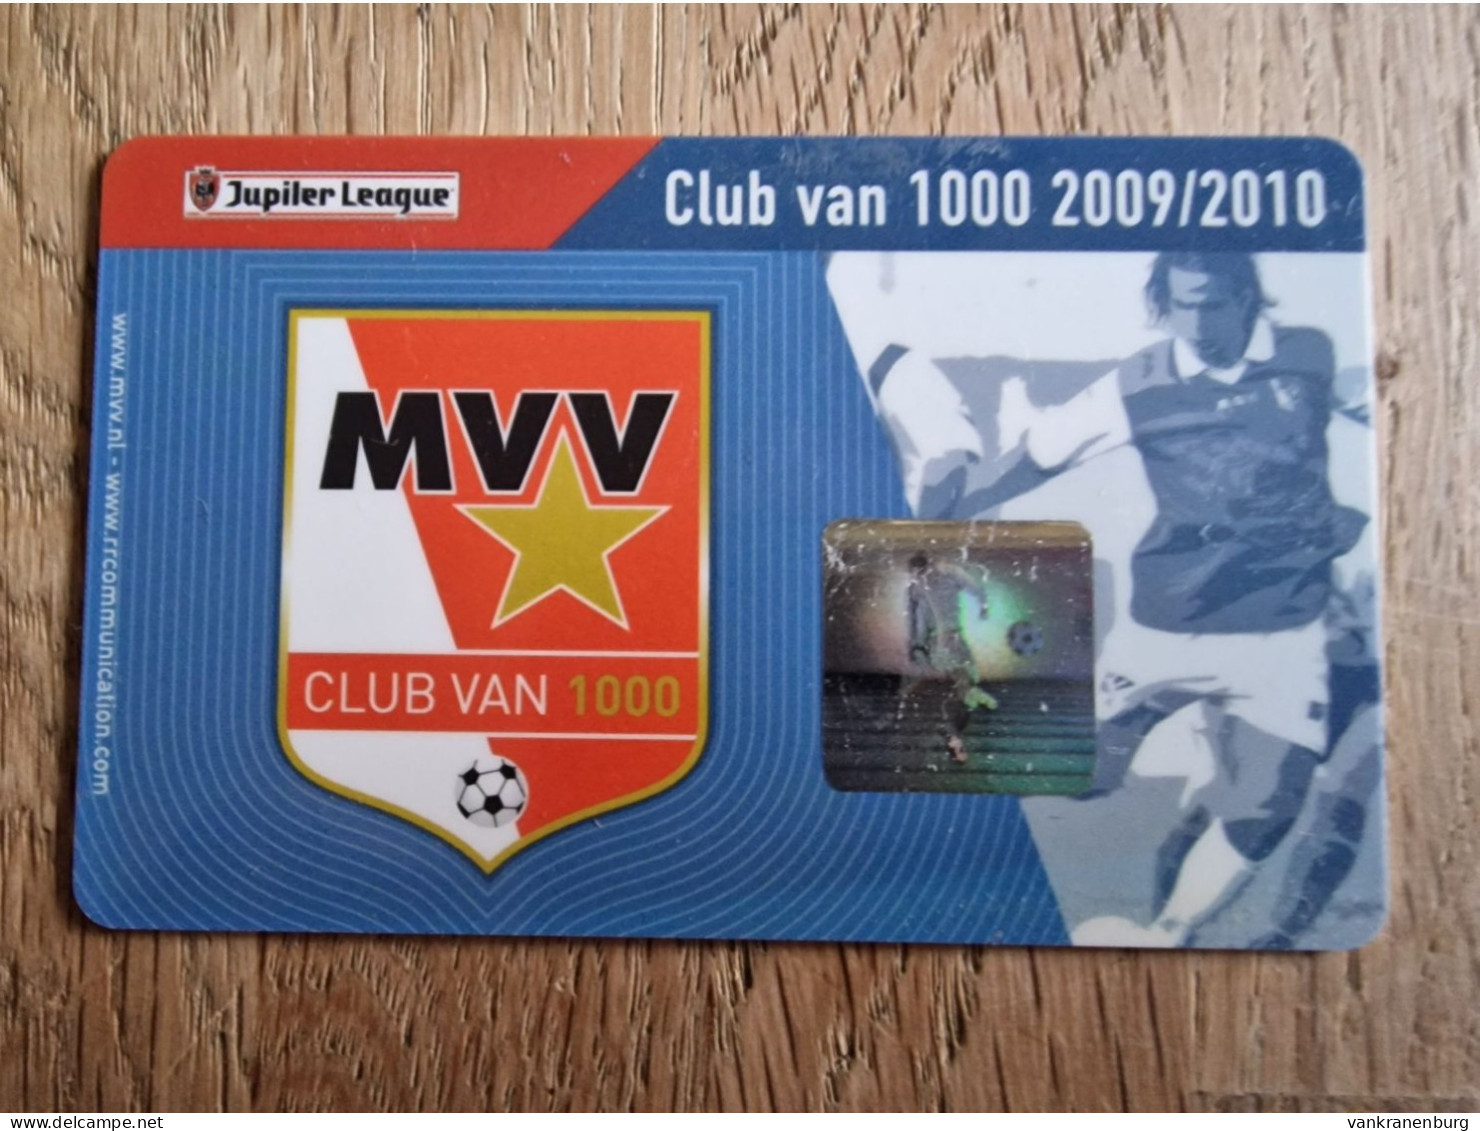 Club Of 1000 Club Card - MVV Maastricht - 2009-2010 - Football Soccer Fussball Voetbal Foot - Habillement, Souvenirs & Autres